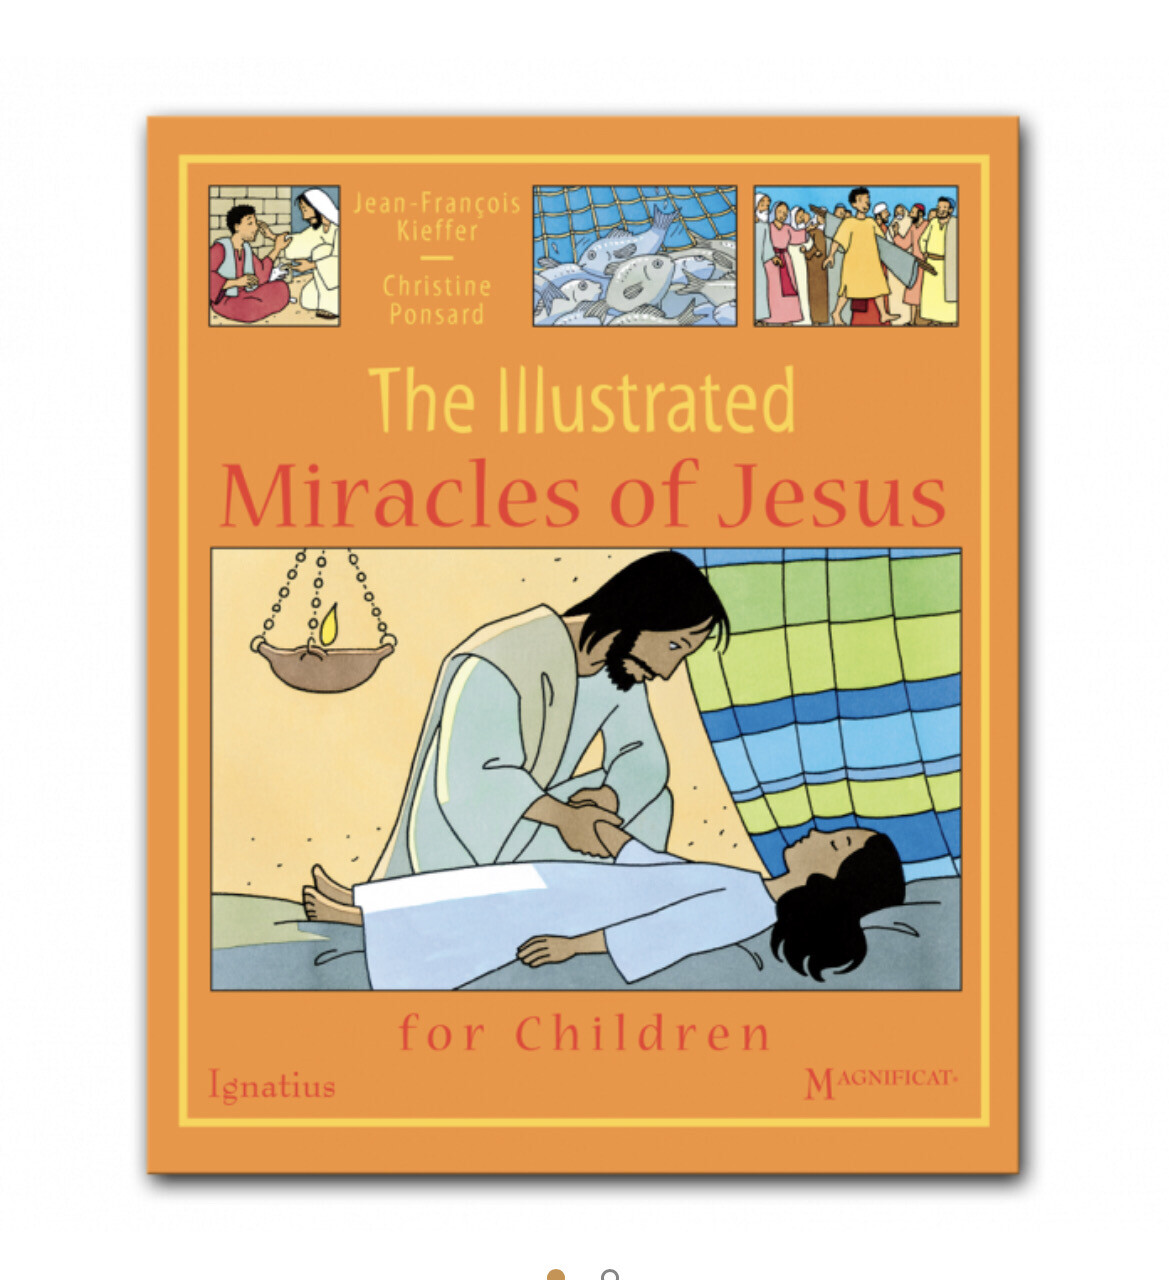 The Illustrated Miracles of Jesus by Jean-Francois Kieffer